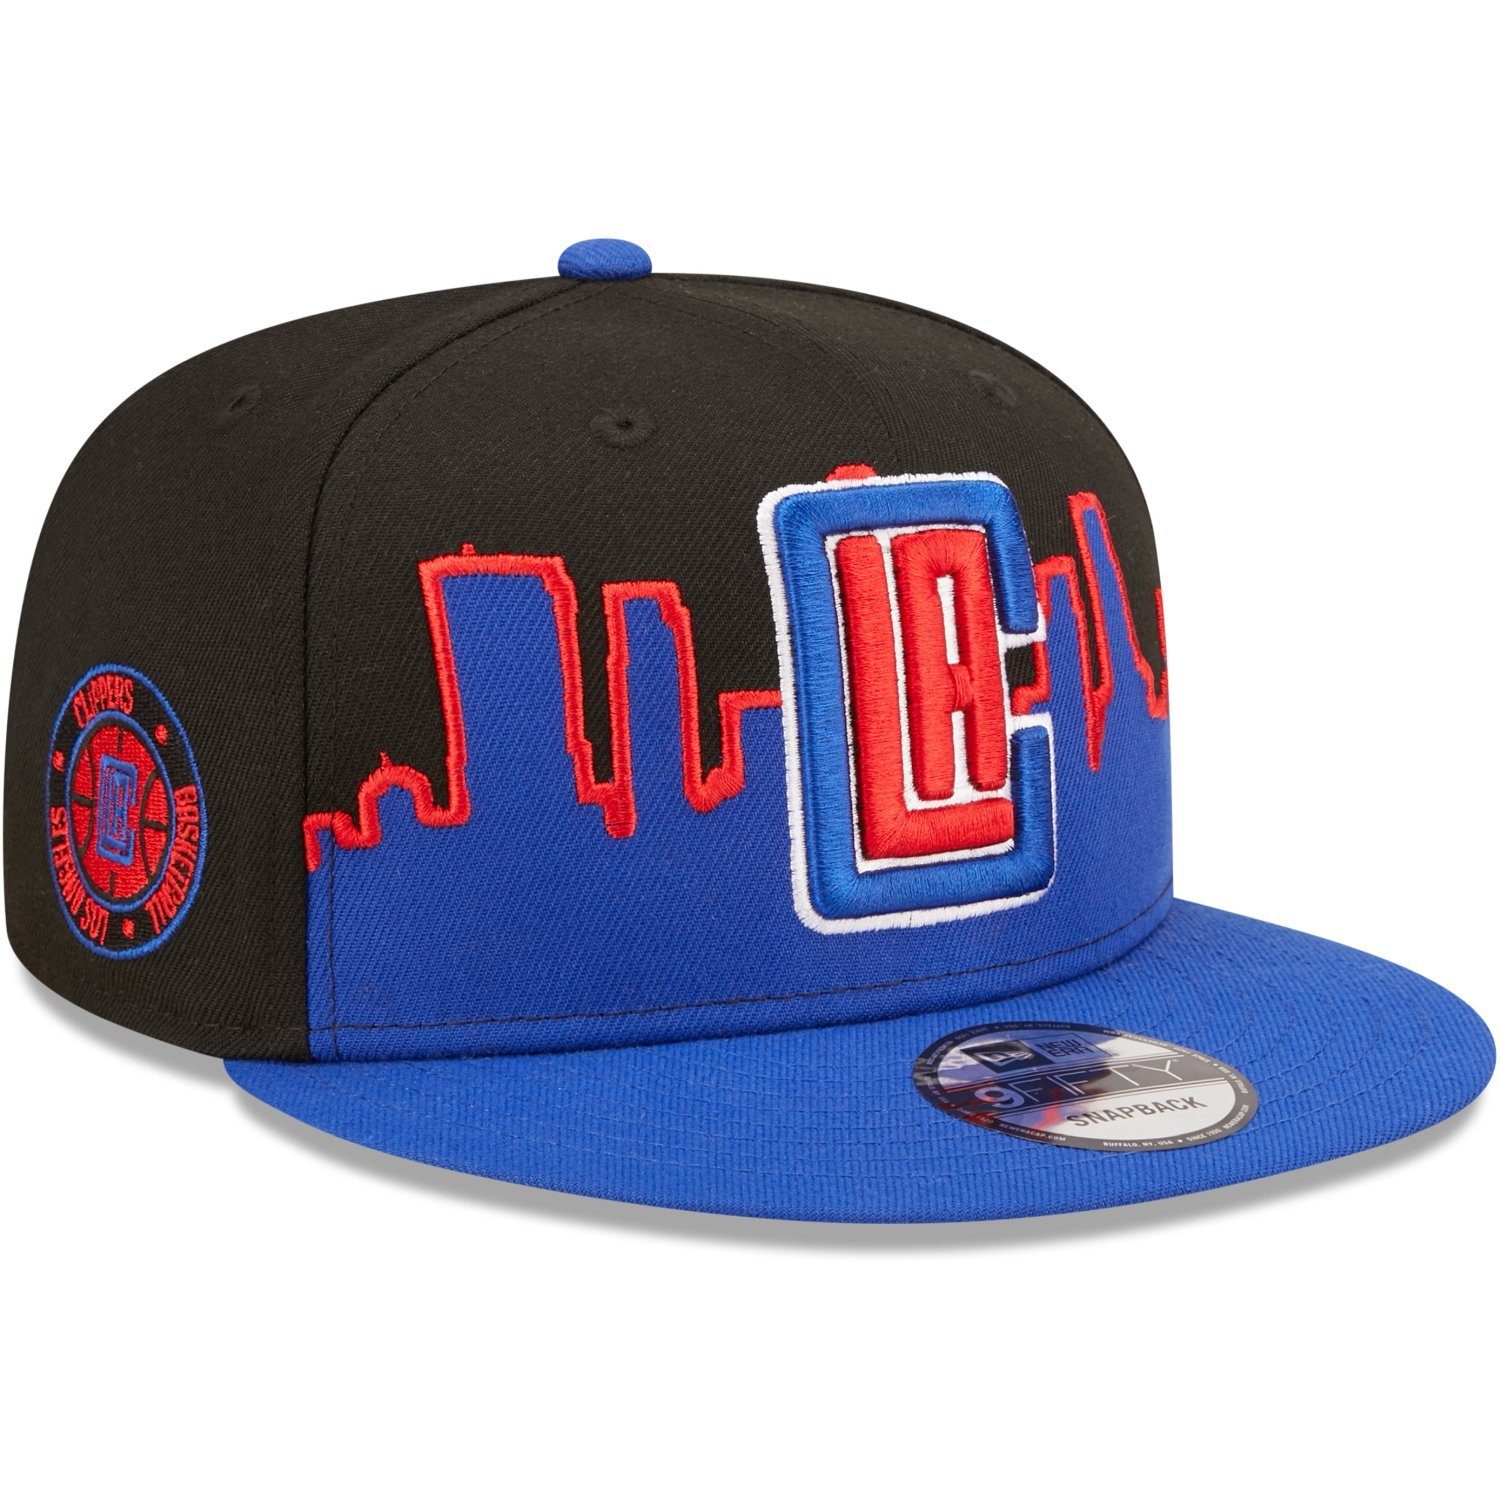 New Era Snapback Cap 9FIFTY TIPOFF Los Angeles Clippers